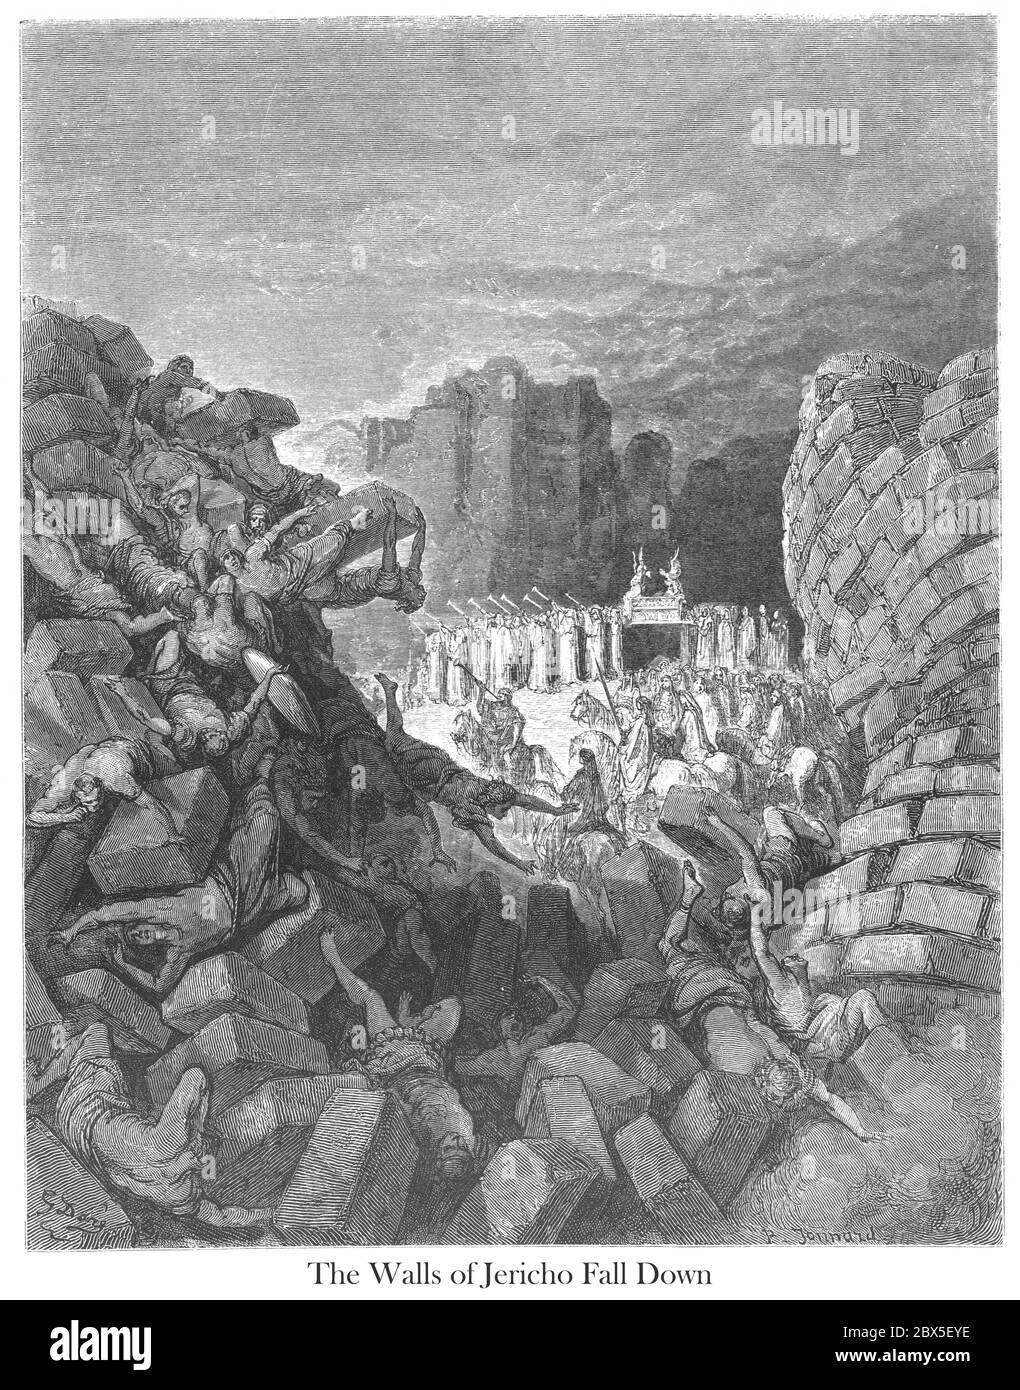 The Walls of Jericho Fall Down Joshua 6:20 From the book 'Bible Gallery' Illustrated by Gustave Dore with Memoir of Dore and Descriptive Letter-press by Talbot W. Chambers D.D. Published by Cassell & Company Limited in London and simultaneously by Mame in Tours, France in 1866 Stock Photo